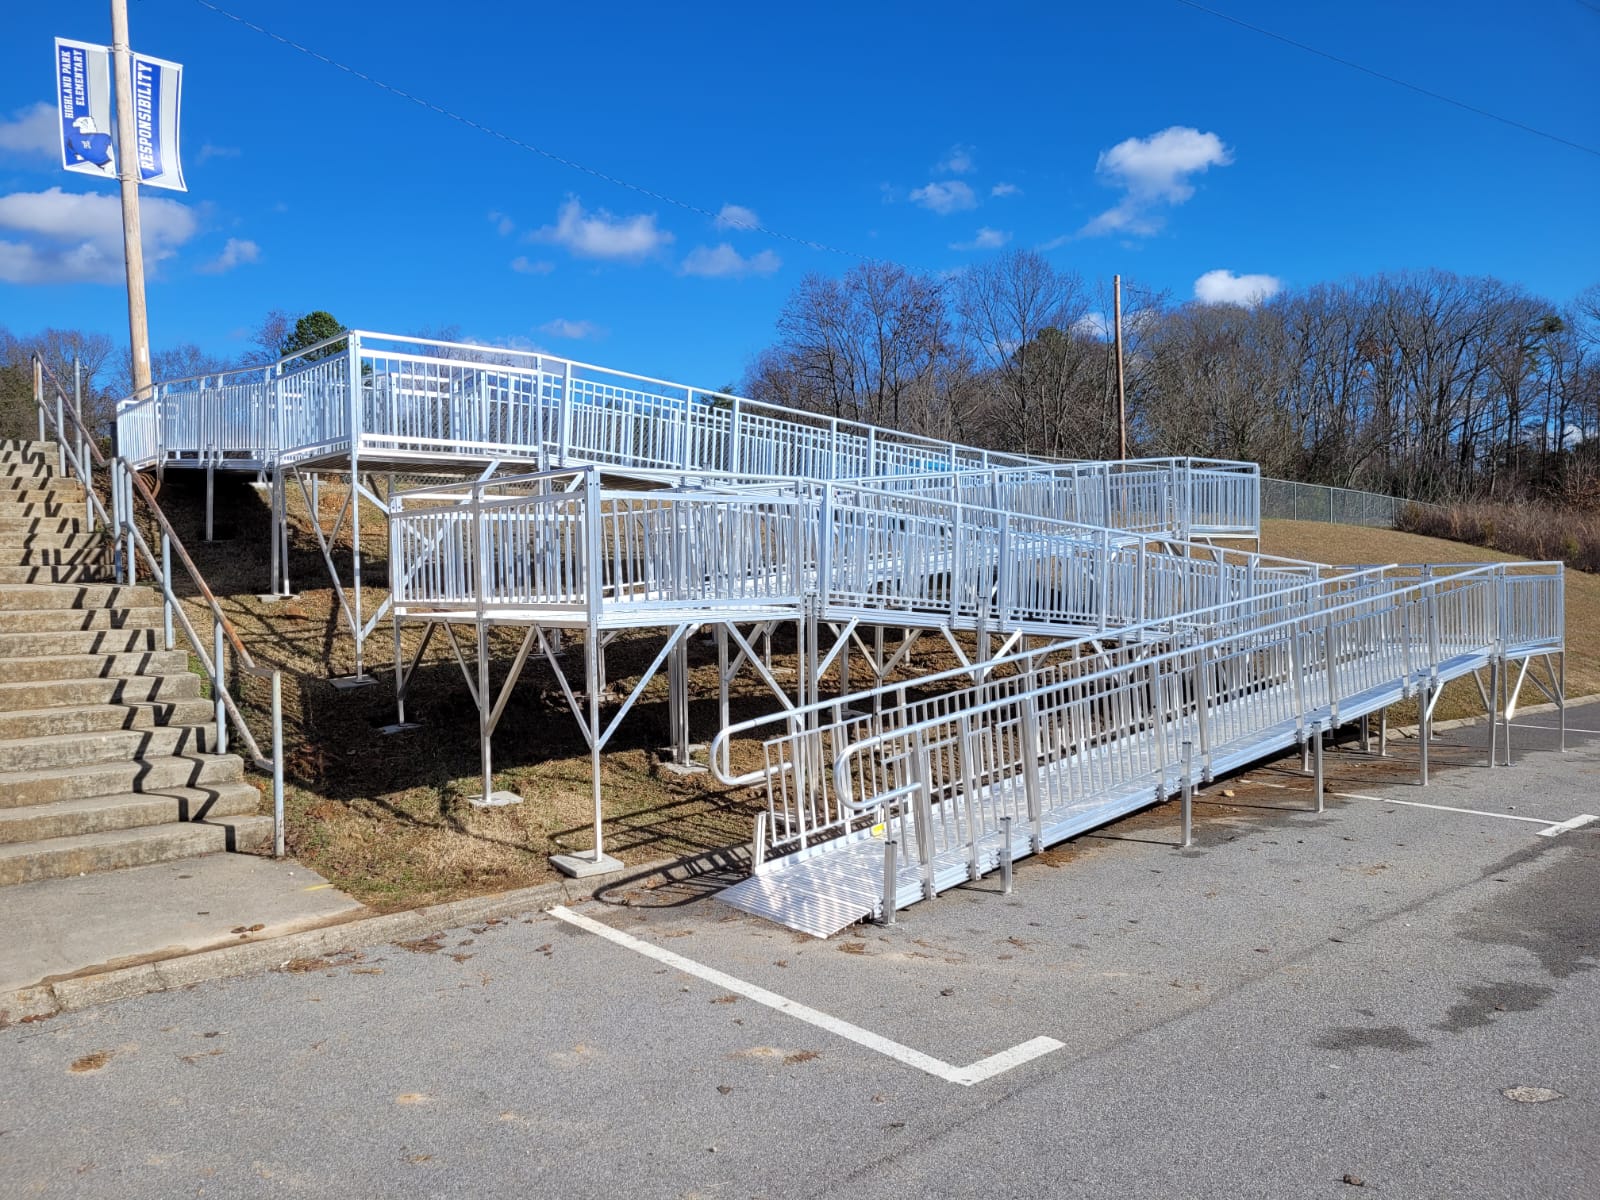 Next Day Access Knoxville Installs a 146 ft ADA Compliant Ramp